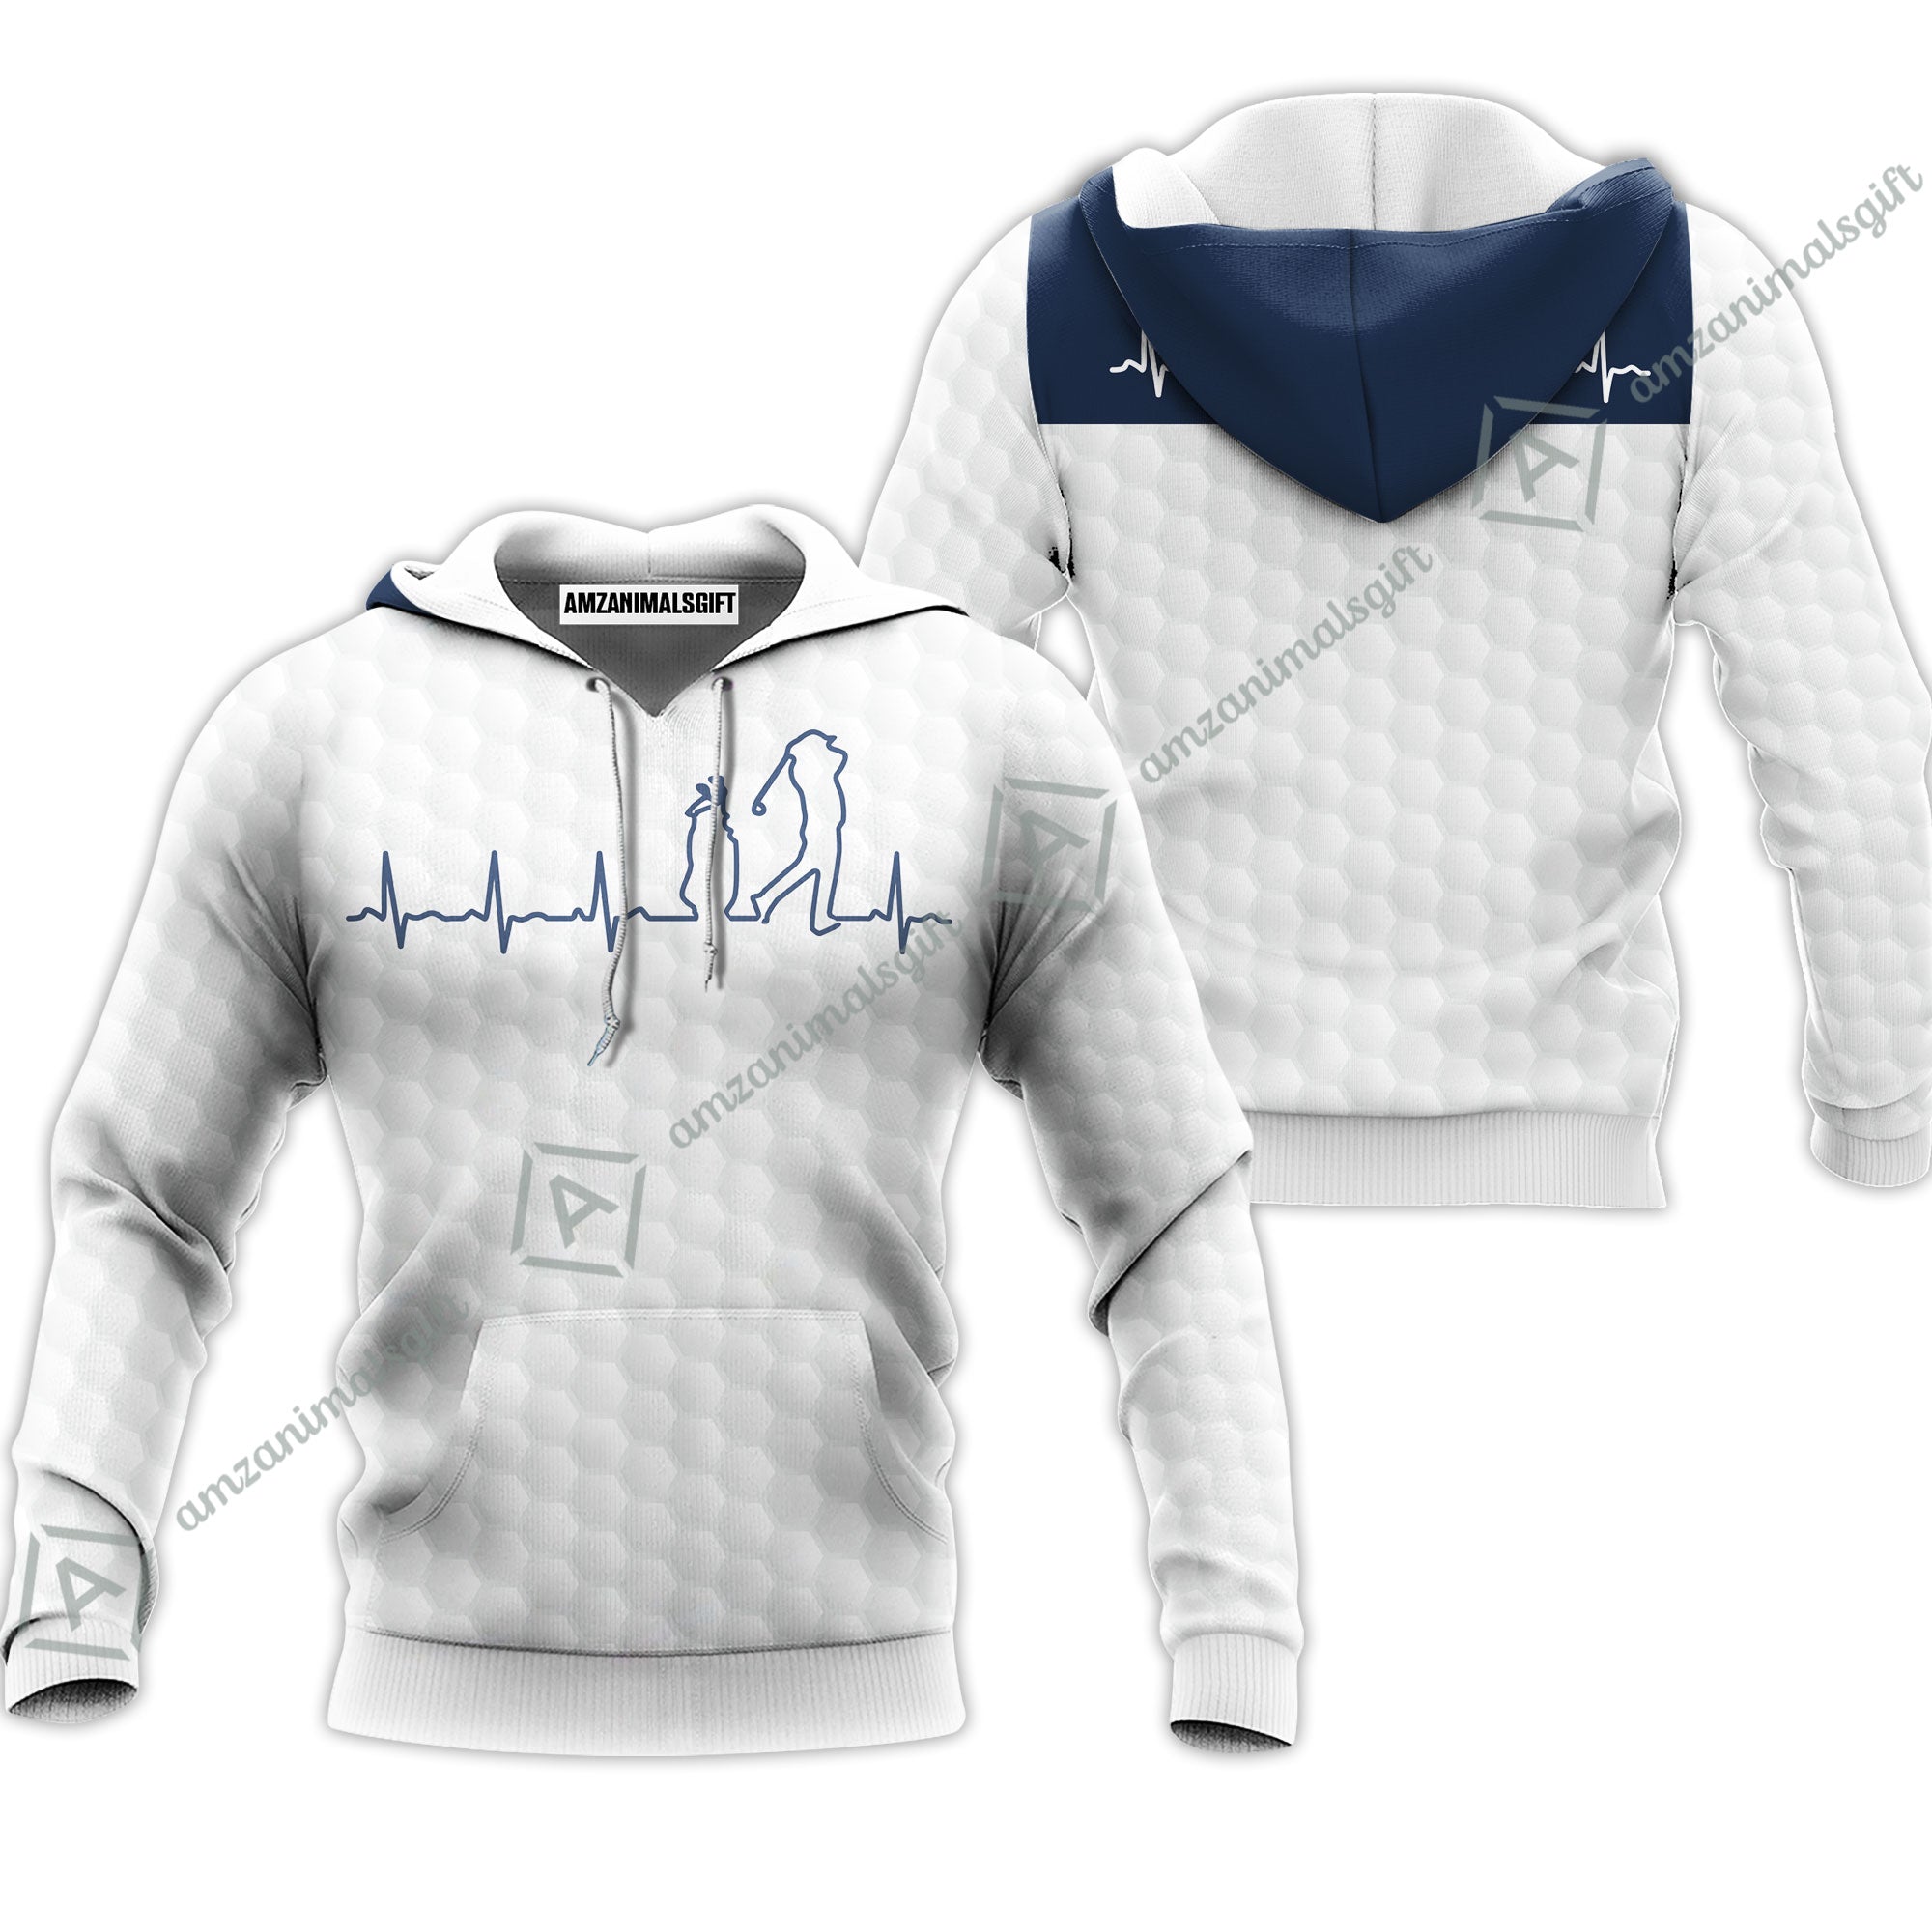 Golf Hoodie - Heartbeat Golfer White And Navy Golf Hoodie, White Golf Ball Pattern Hoodie - Best Gift For Golfers